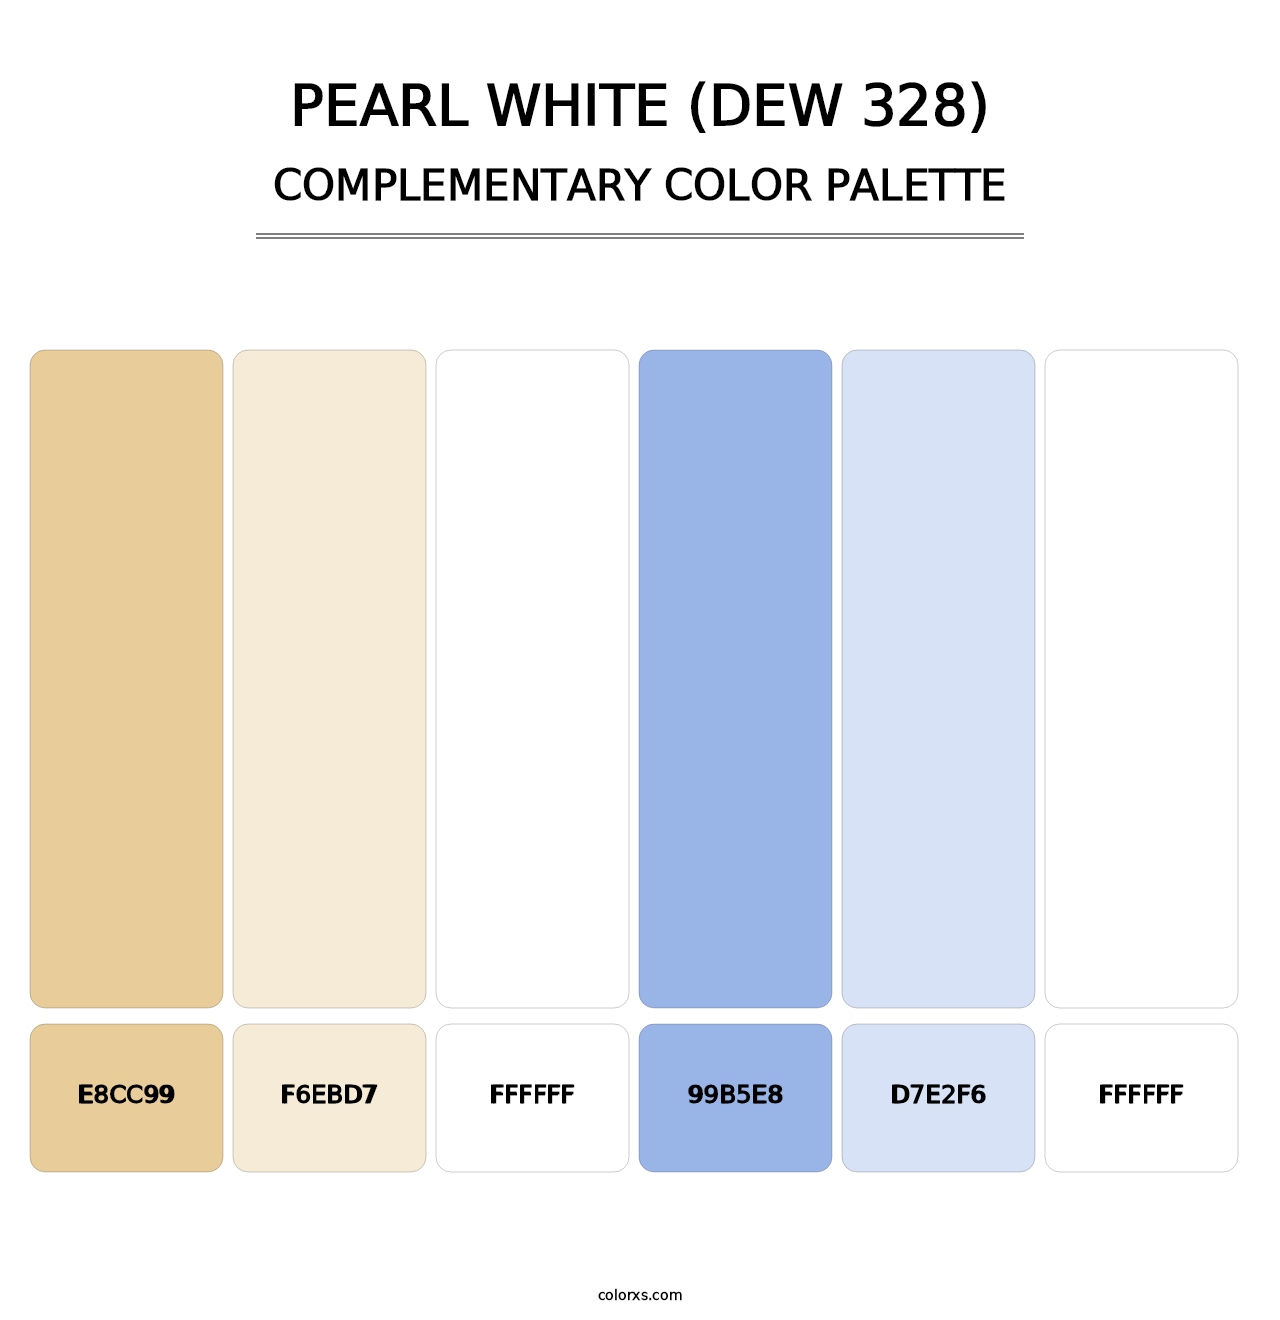 Pearl White (DEW 328) - Complementary Color Palette